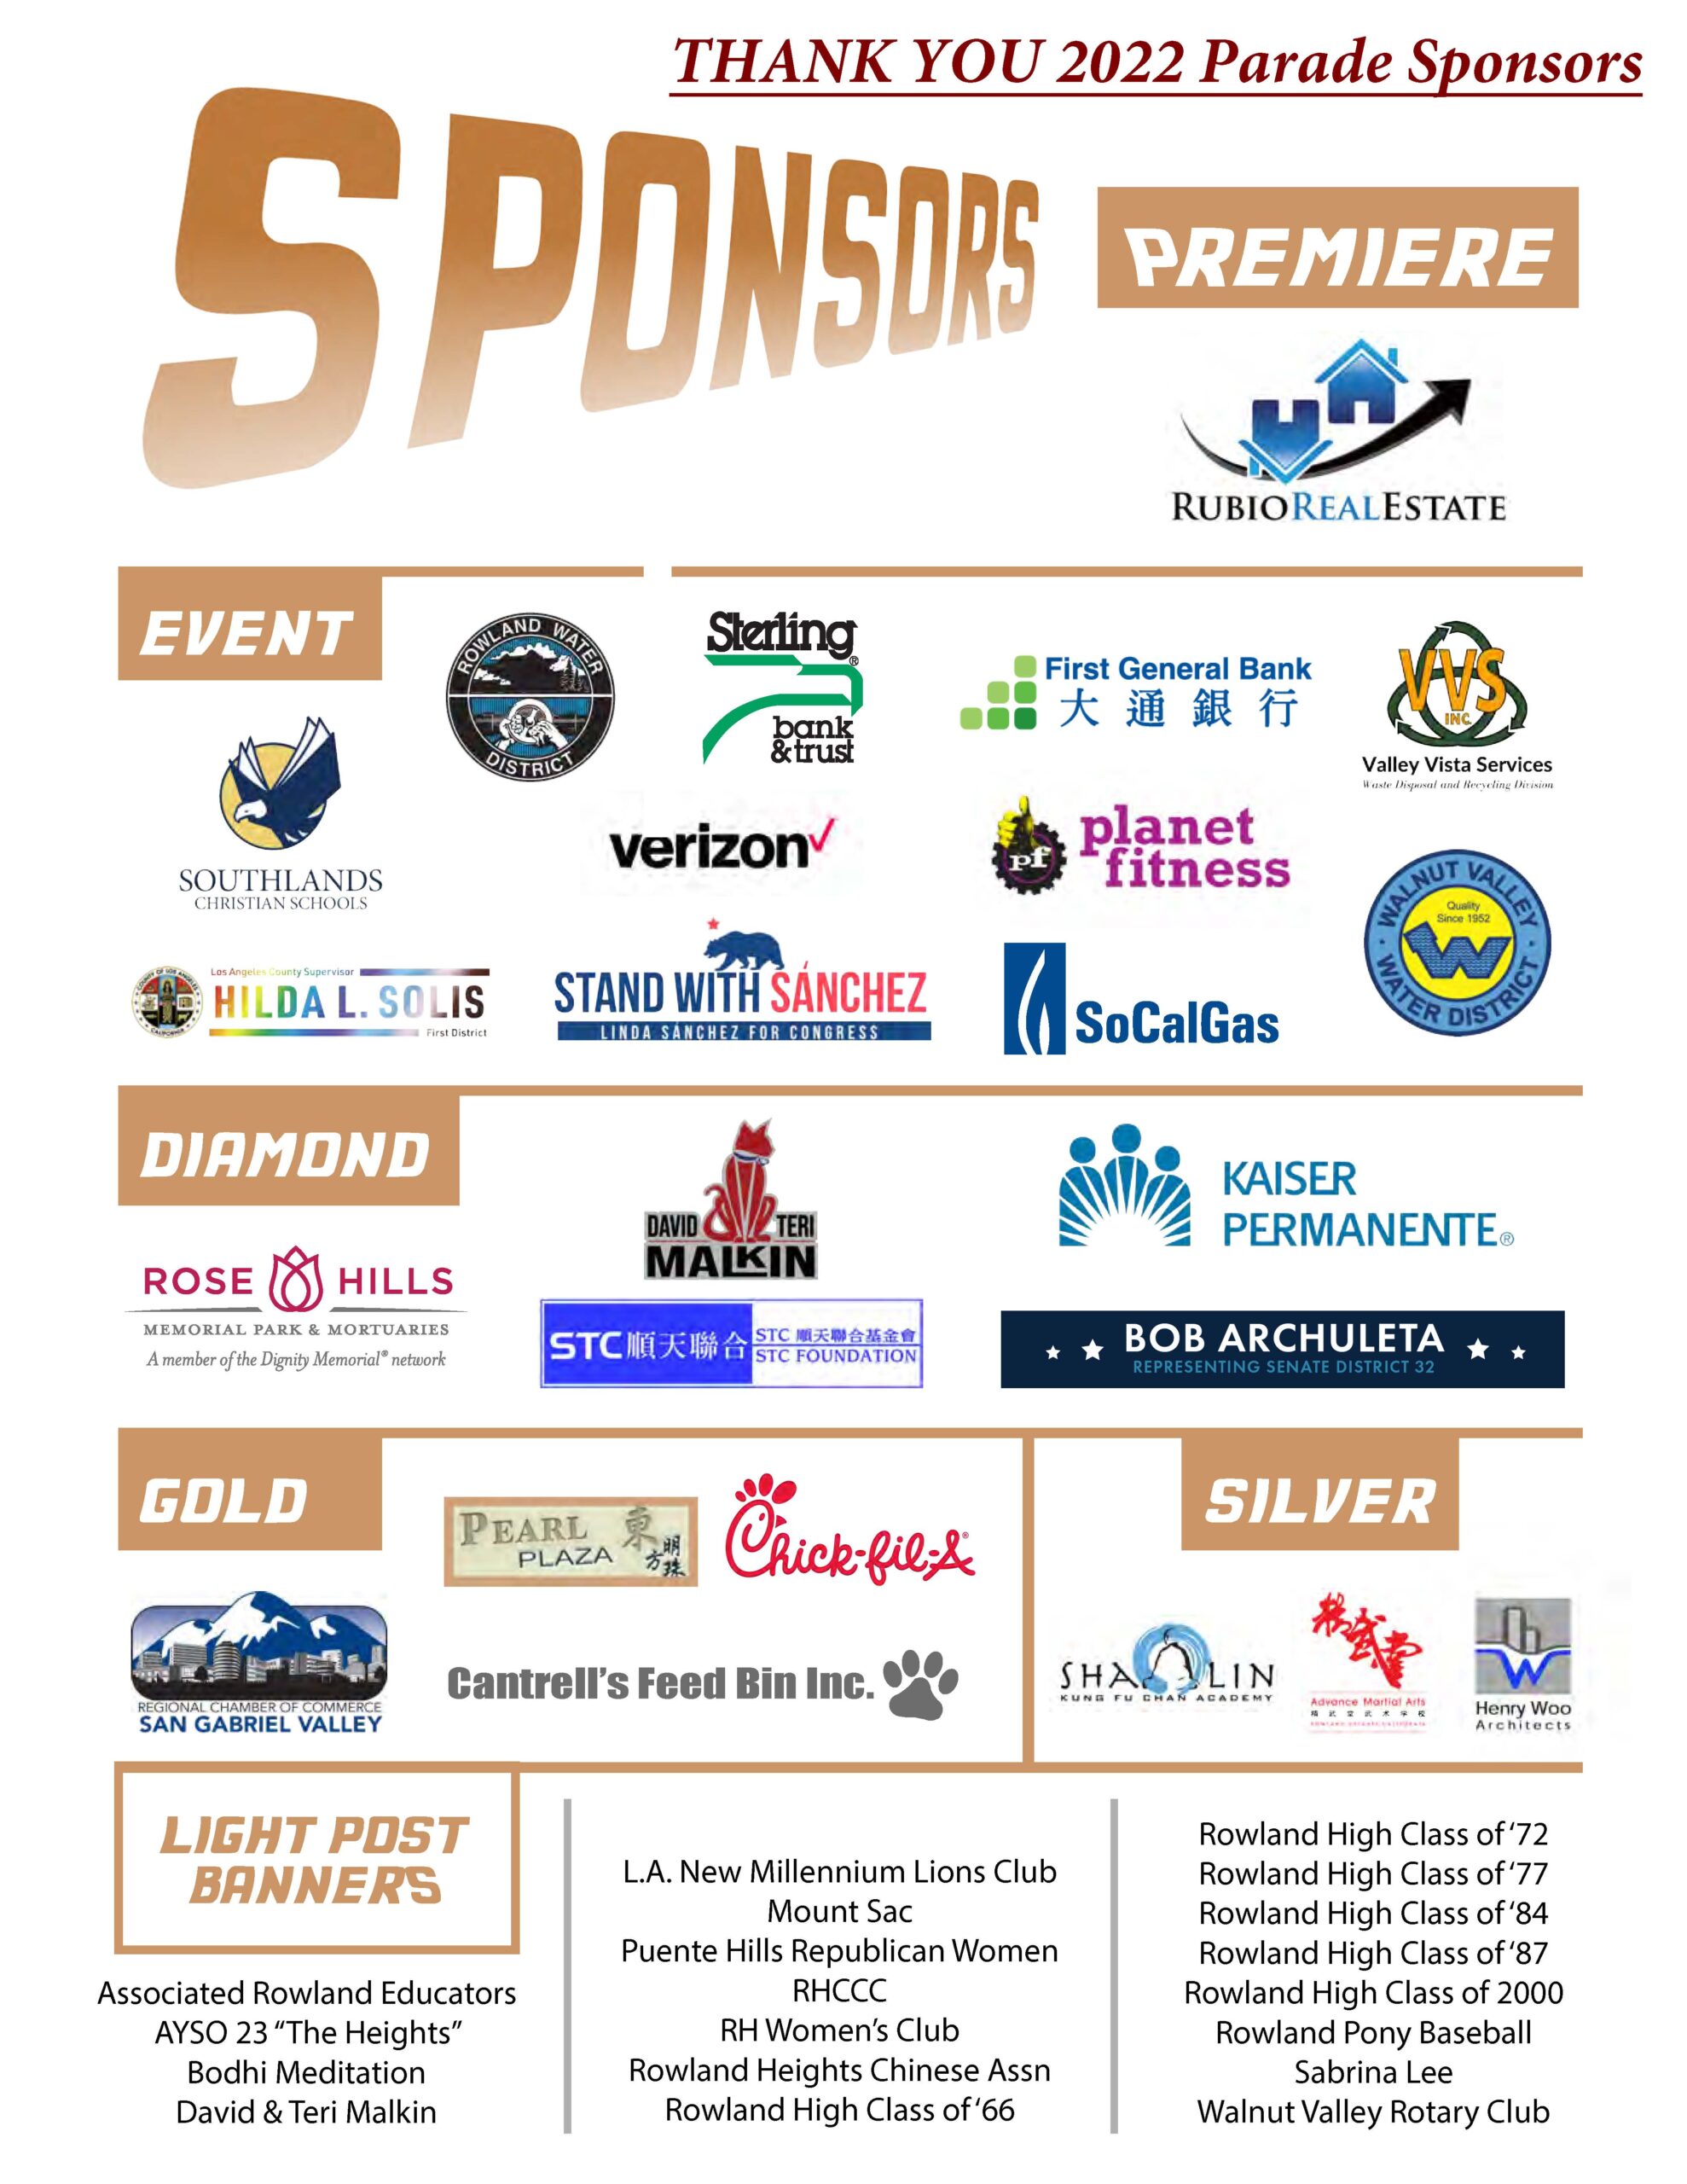 List of sponsors for the parade